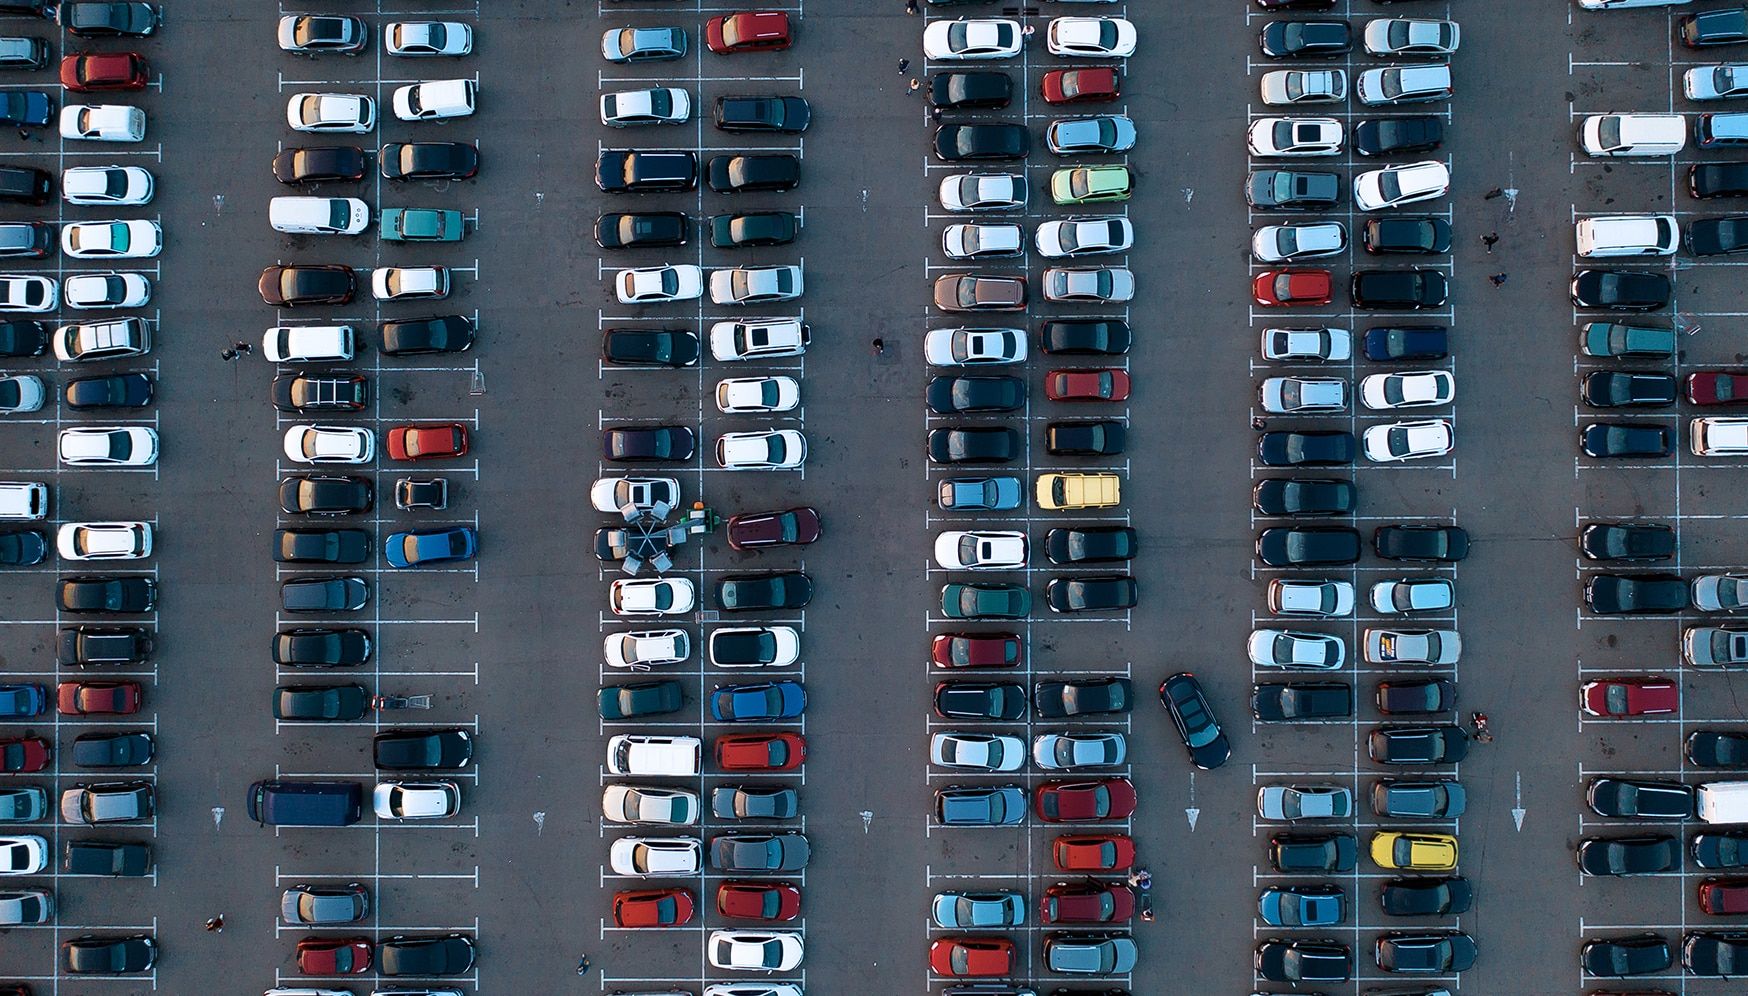 A large parking lot full of vehicles